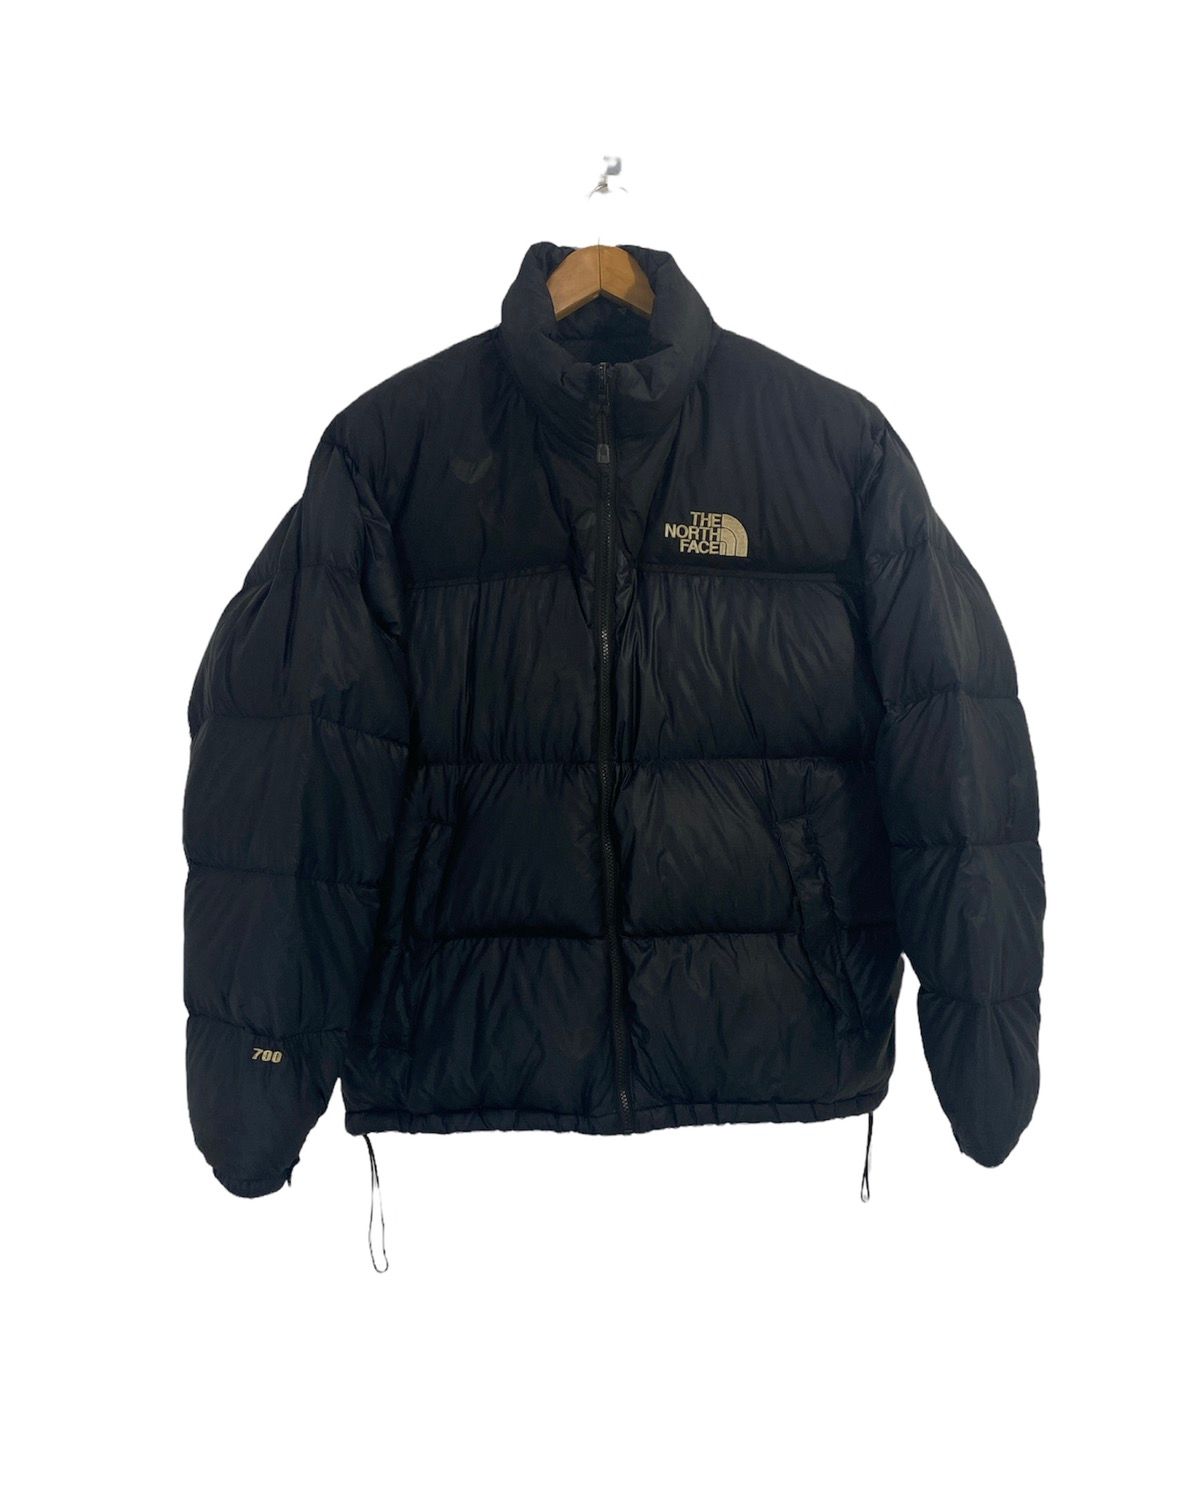 Pre-owned The North Face Vintage  Puffer Jacket 700 Nuptse Black Color